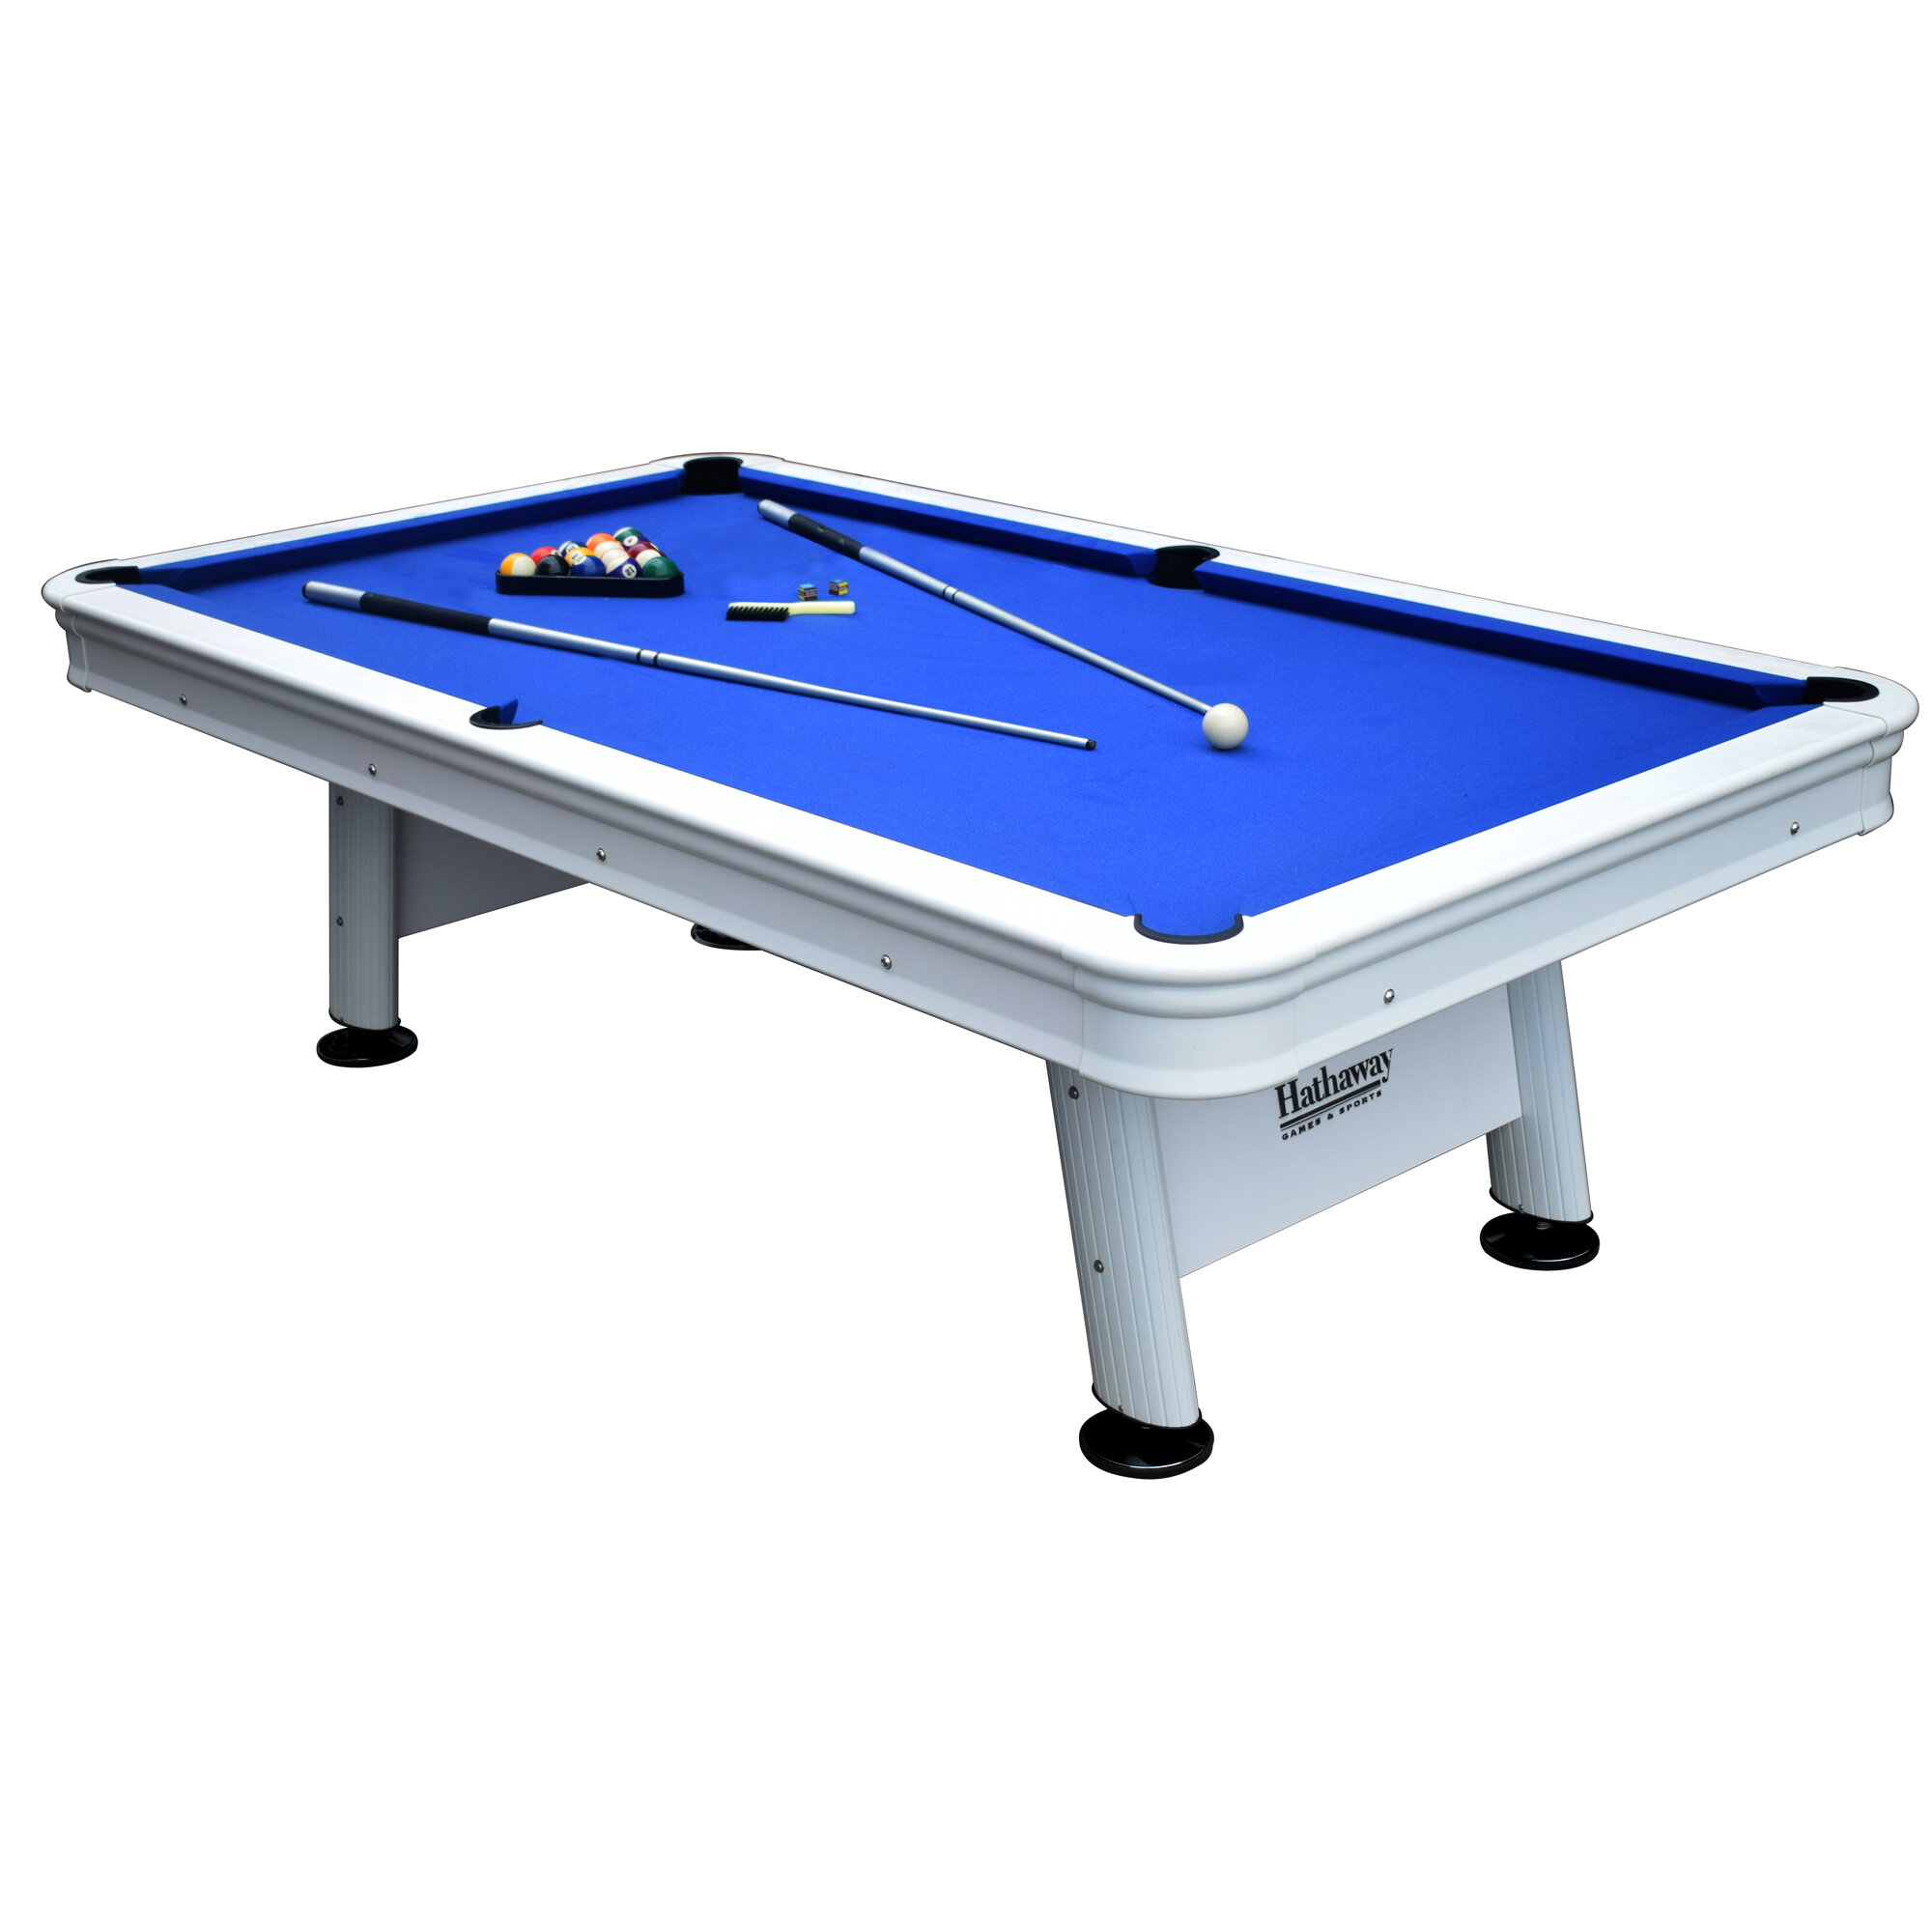 Sports Outdoors 7 Foot Orlando Indoor Outdoor Pool Table